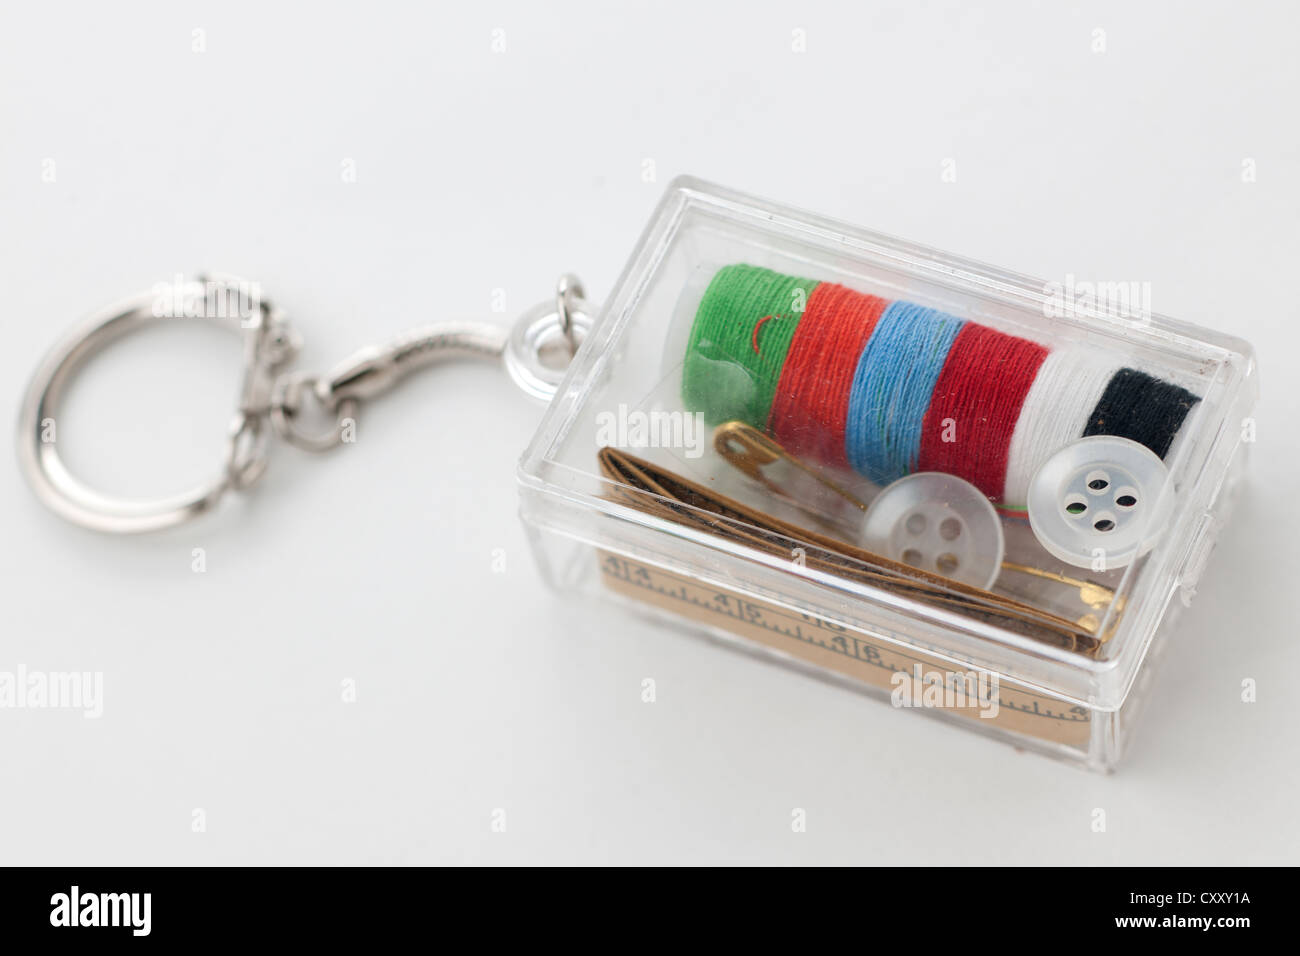 Novelty keyring with attached sewing kit Stock Photo